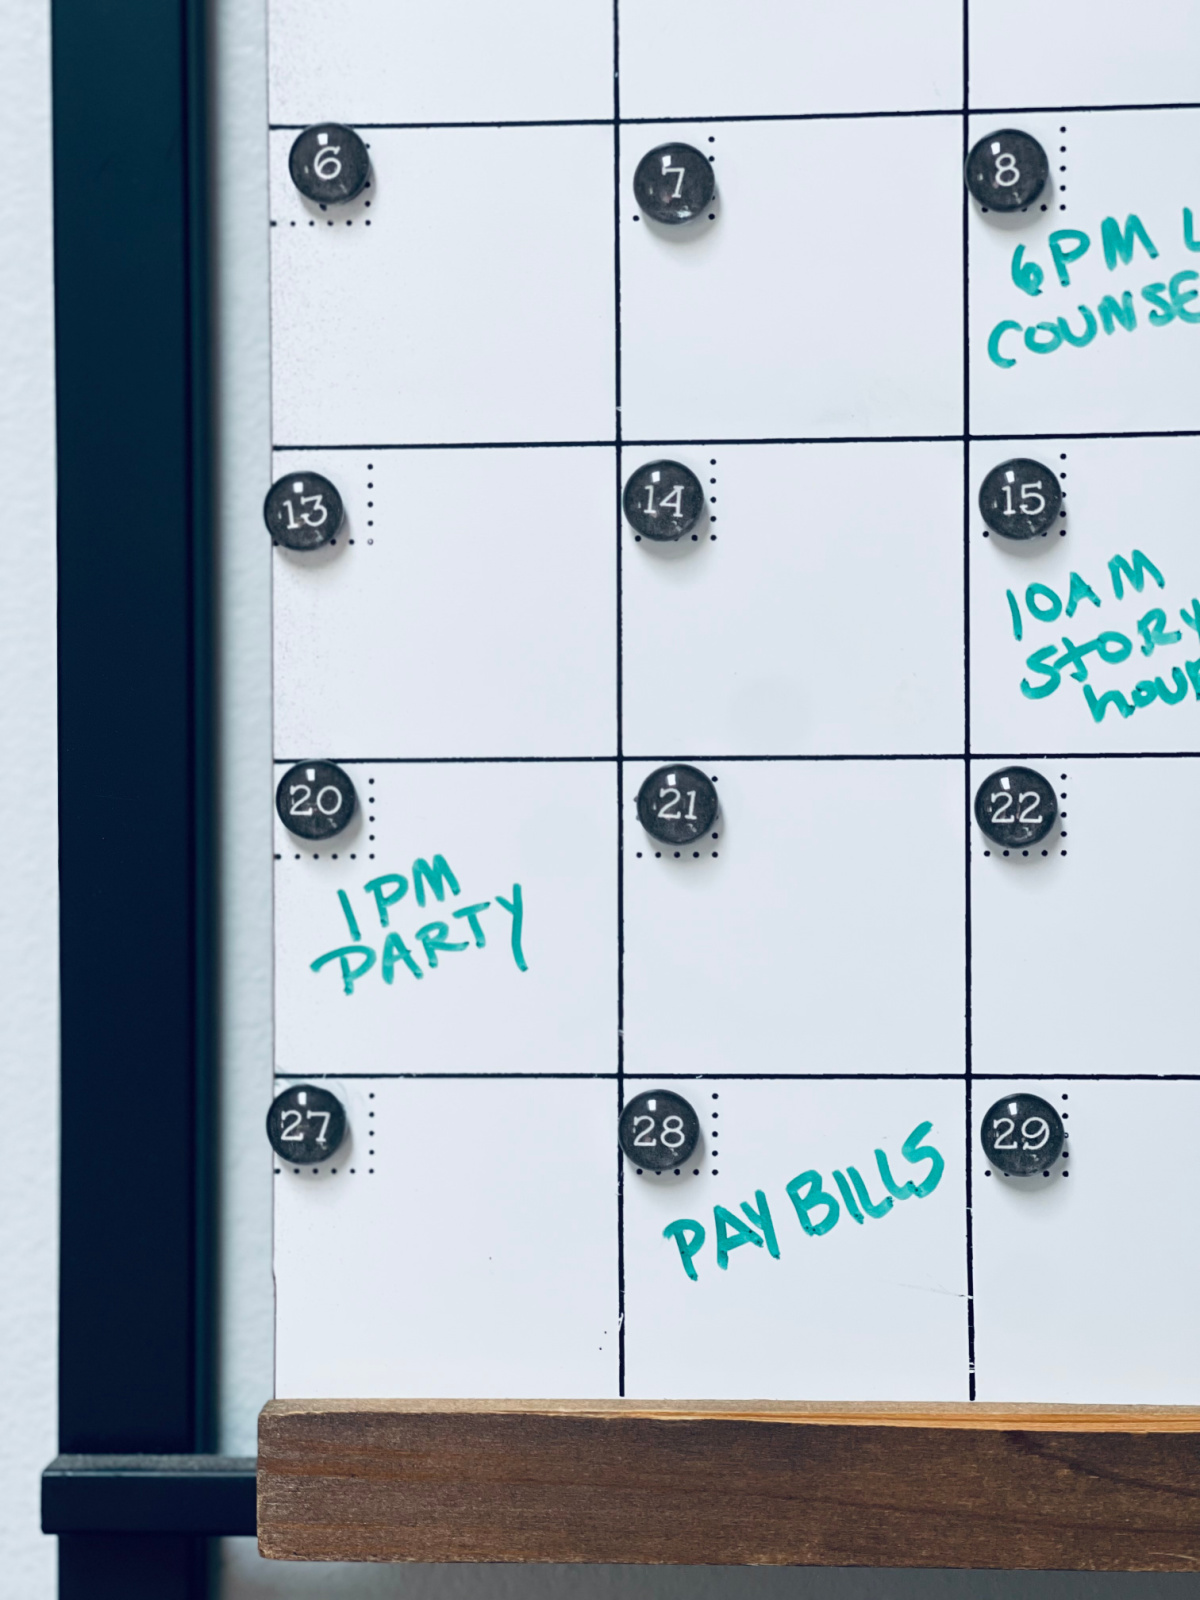 close-up of wall calendar with "pay bills" on the 28th.